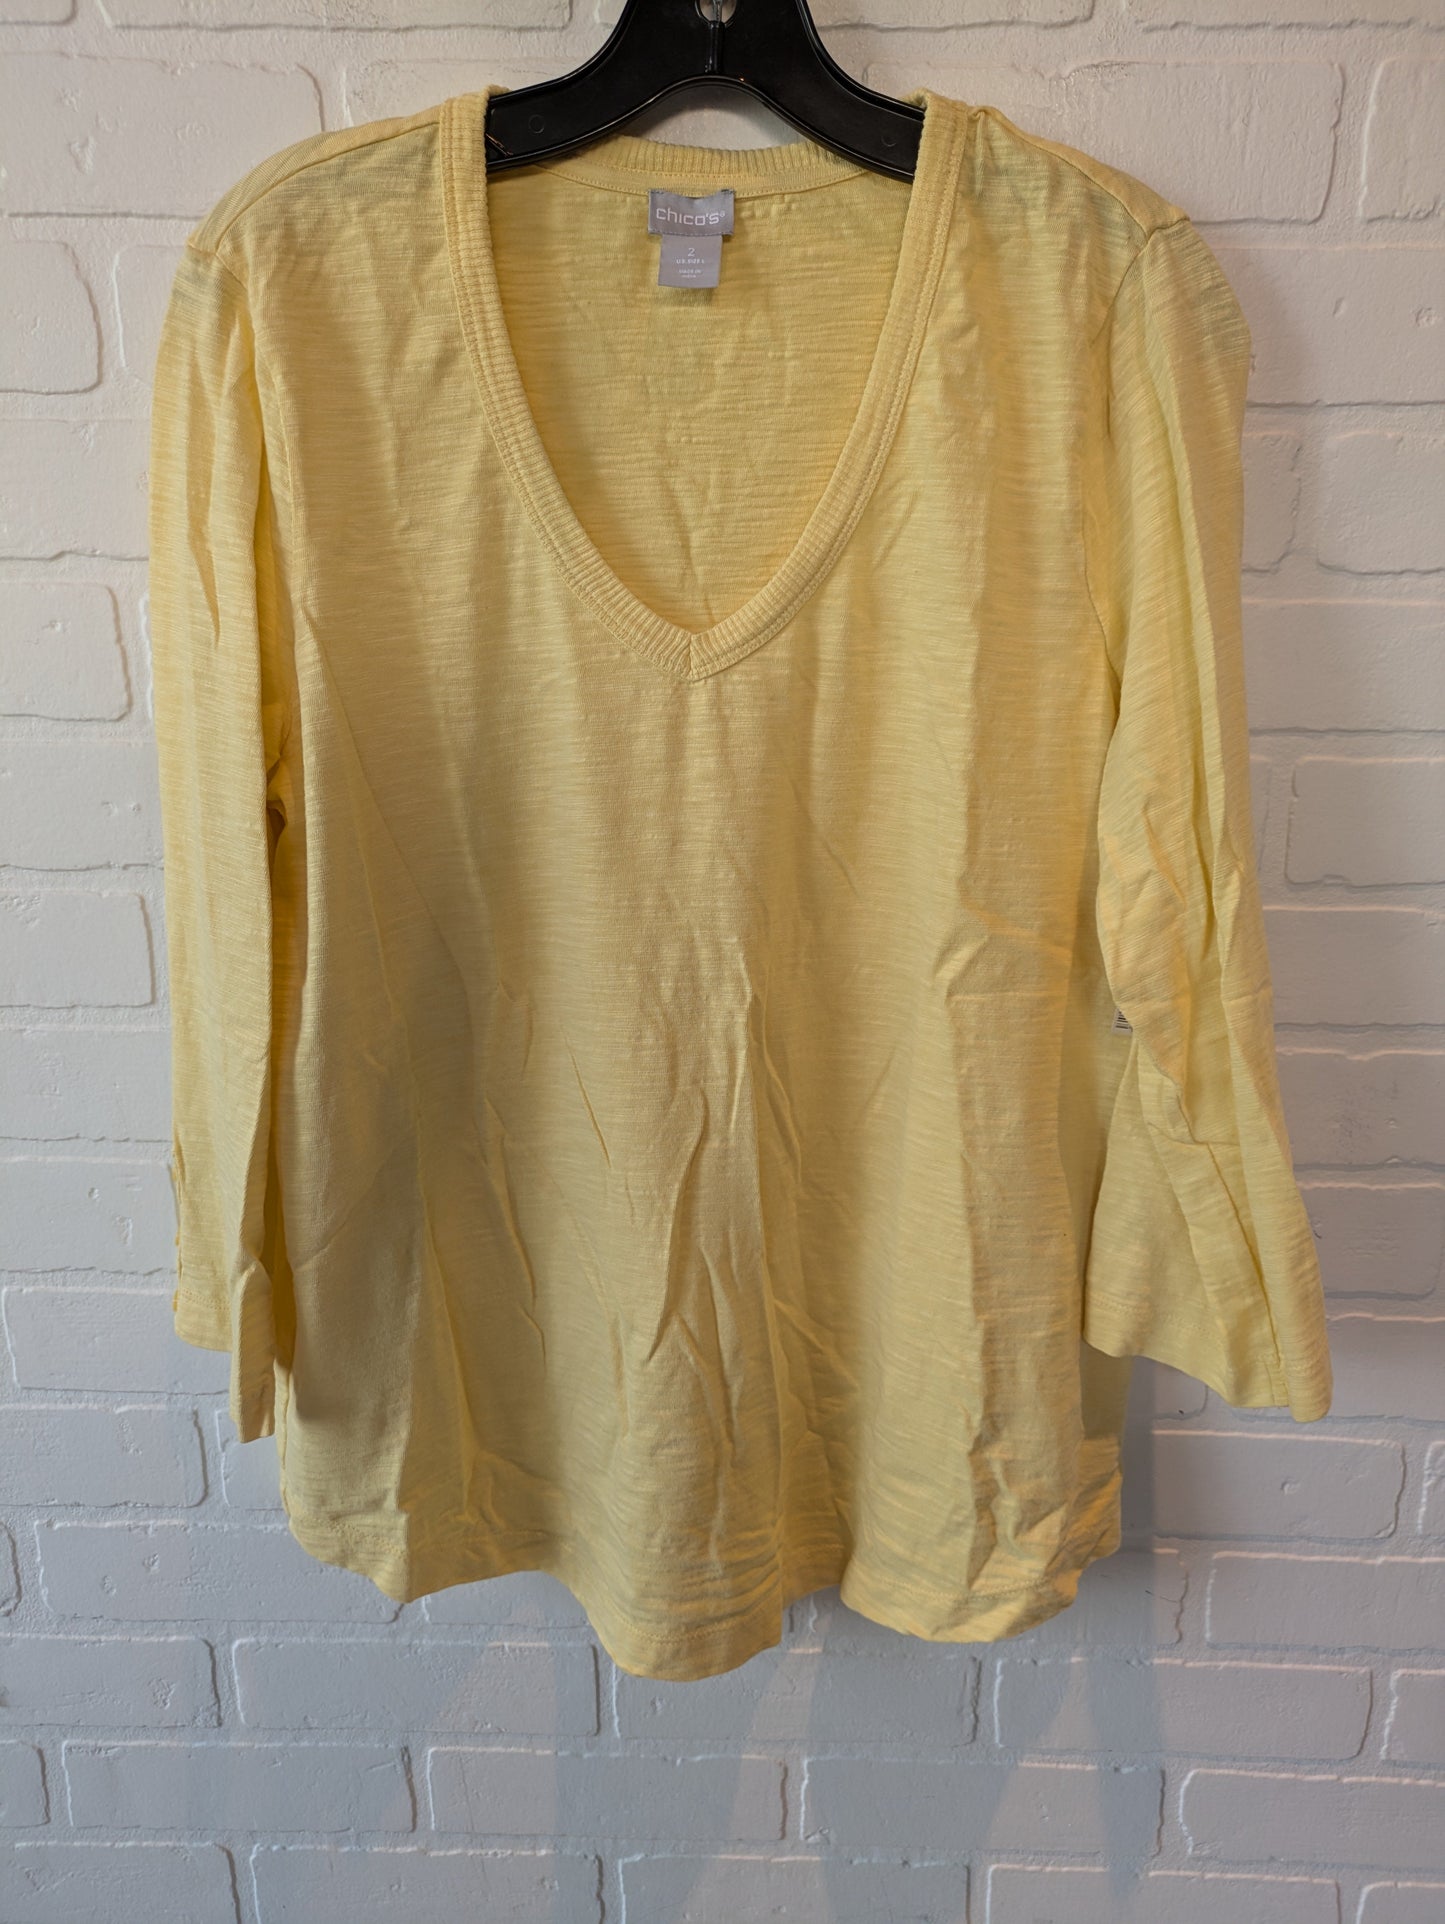 Yellow Top Long Sleeve Chicos, Size L